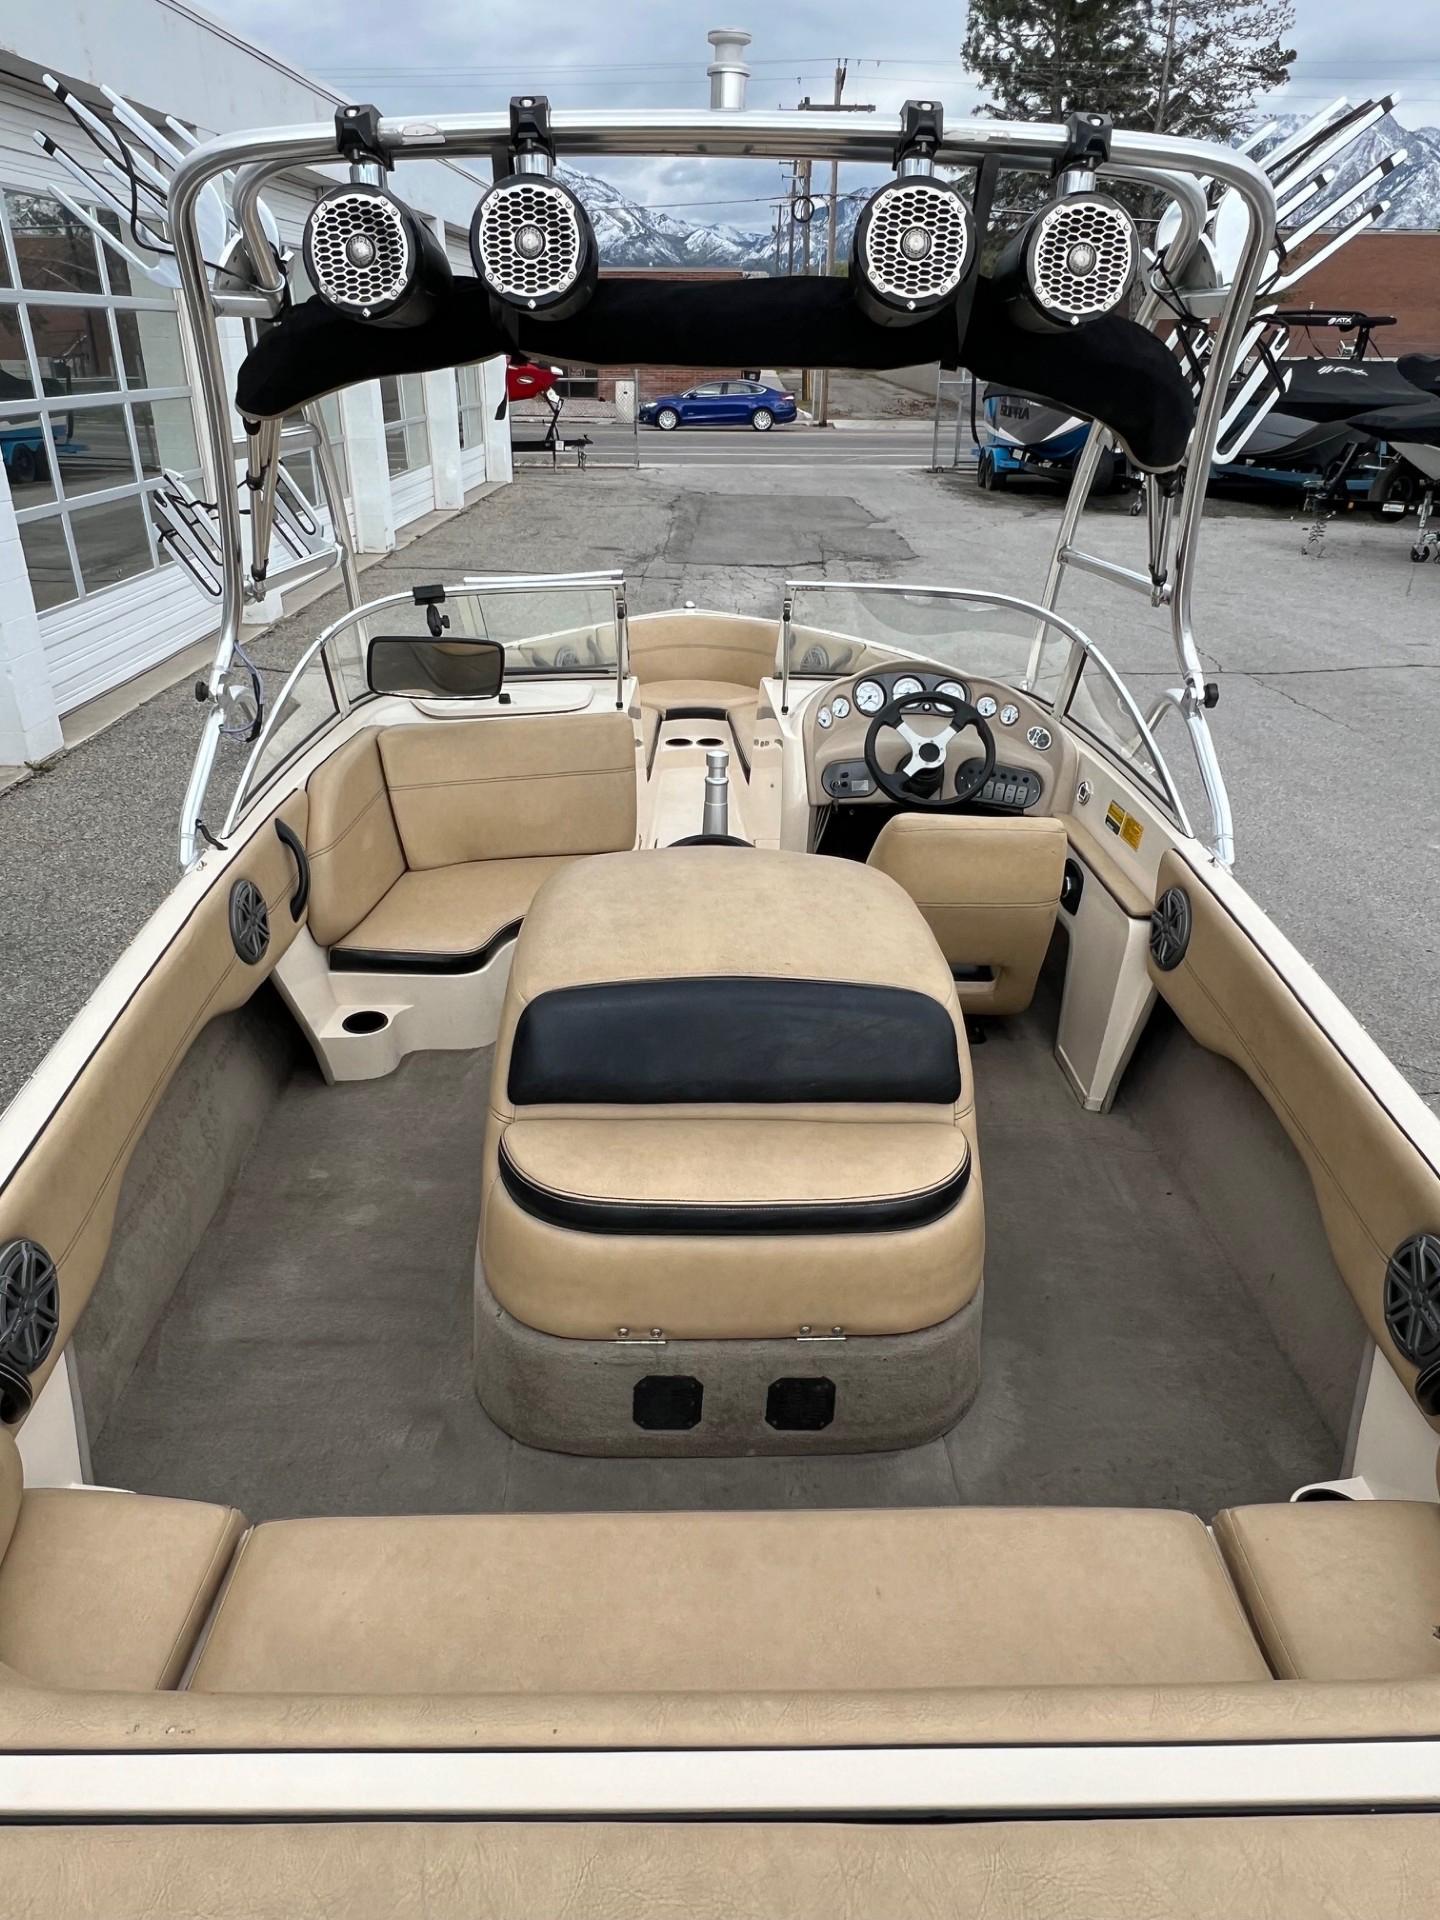 2002 Moomba Outback LS Bowrider